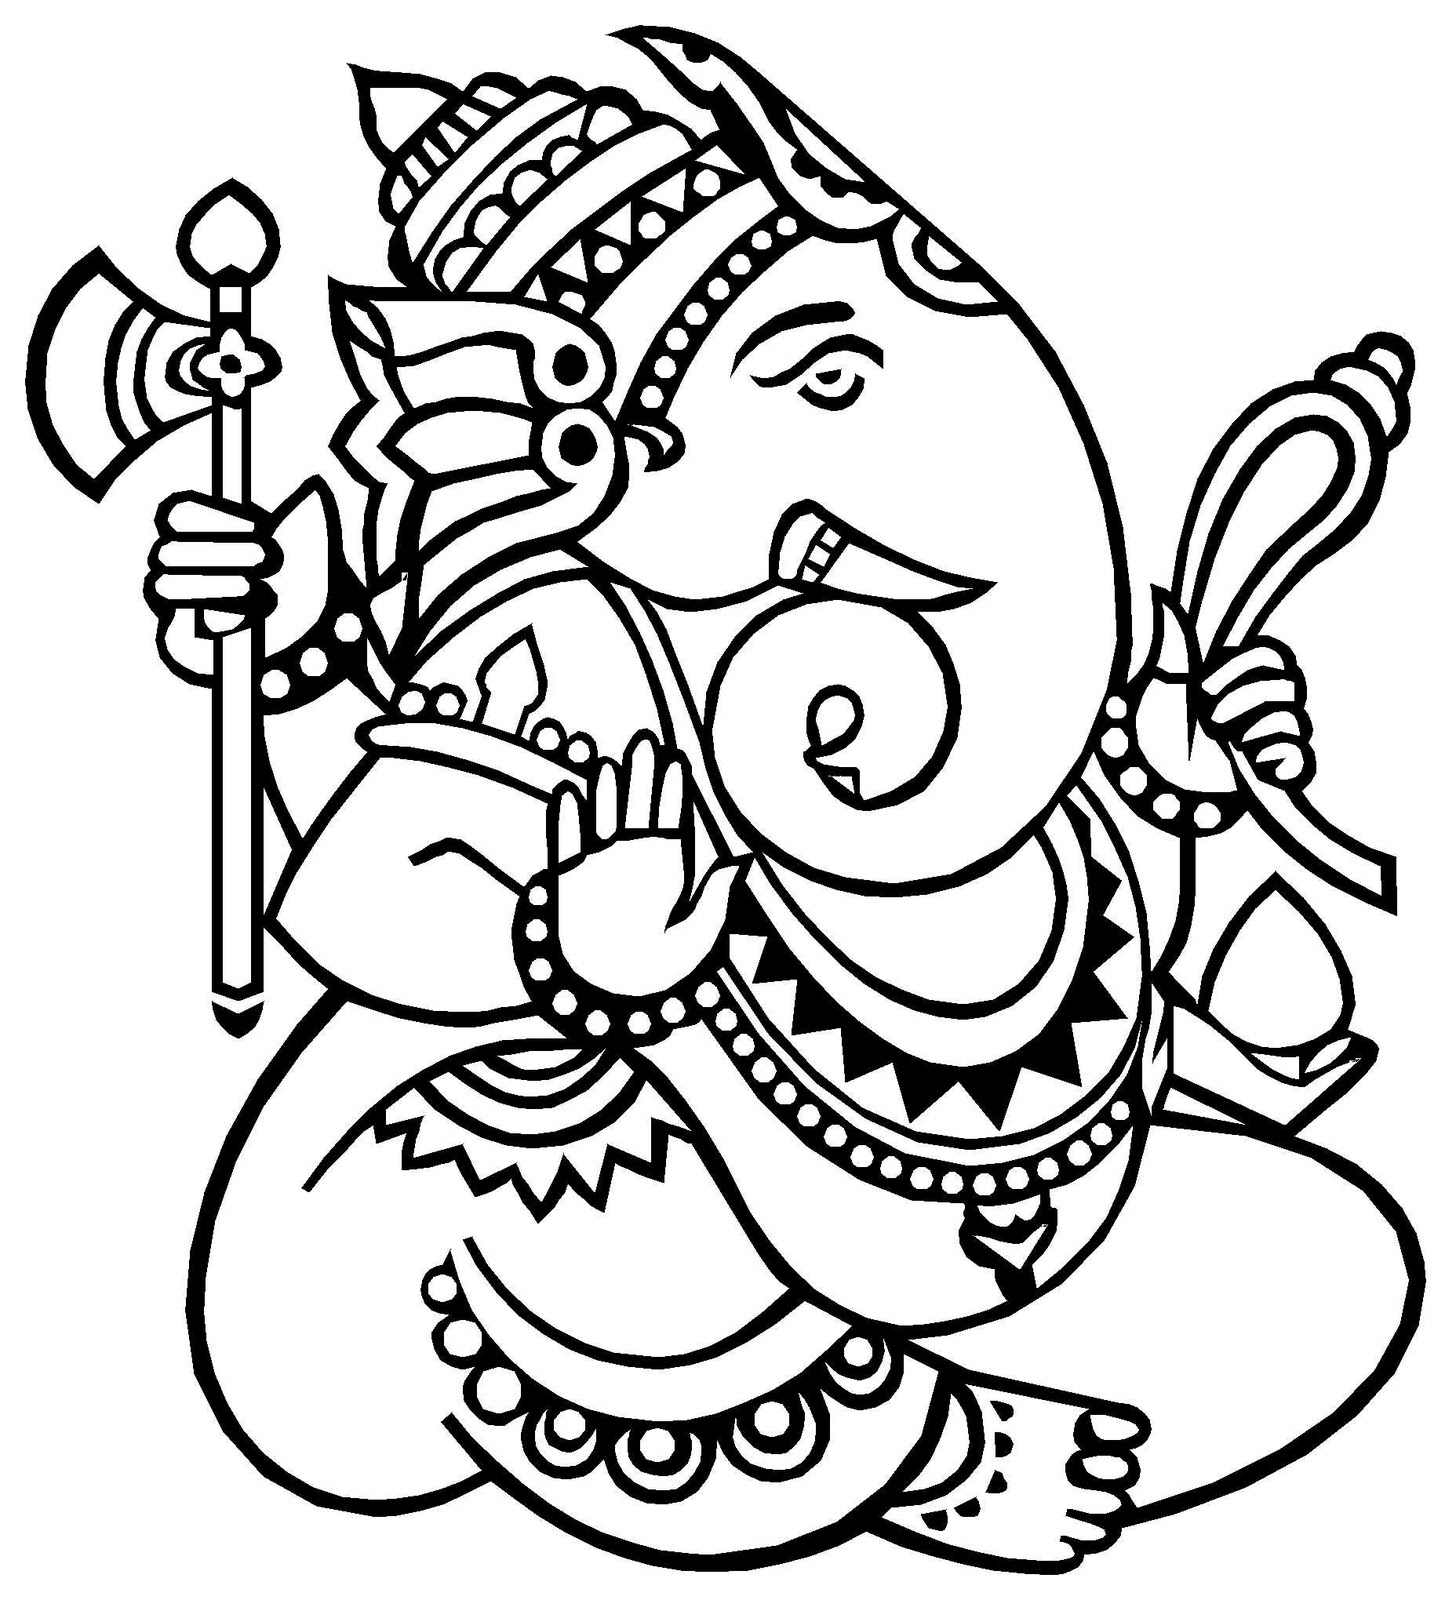 Ganesh Line Drawing - ClipArt Best